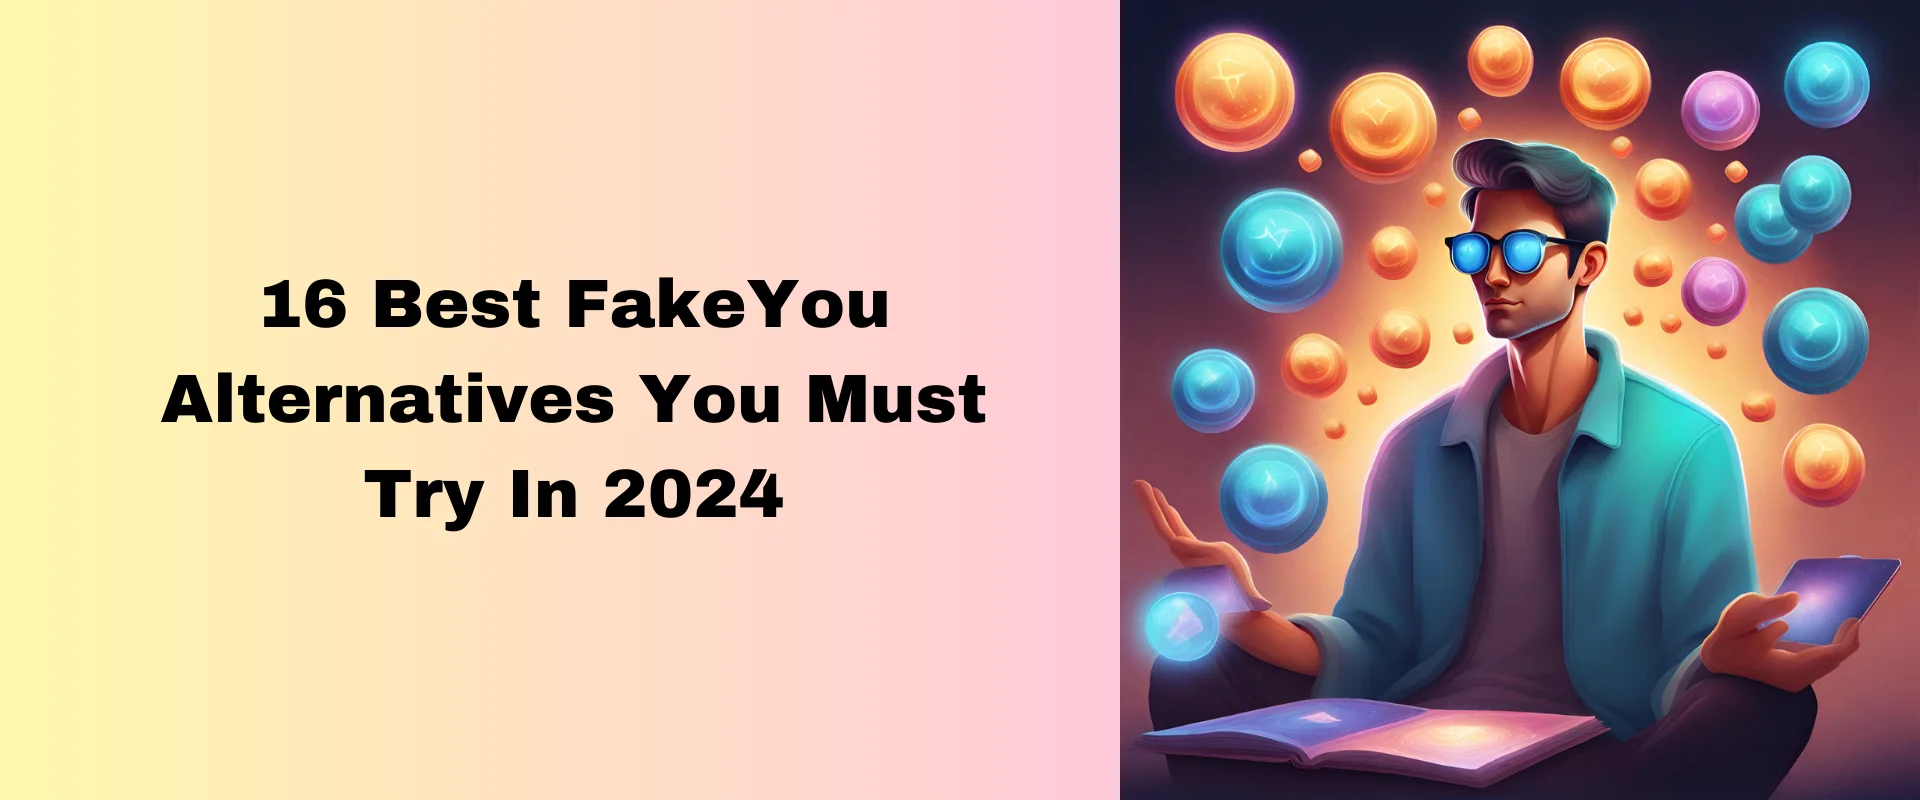 16 Best FakeYou Alternatives You Must Try in 2024